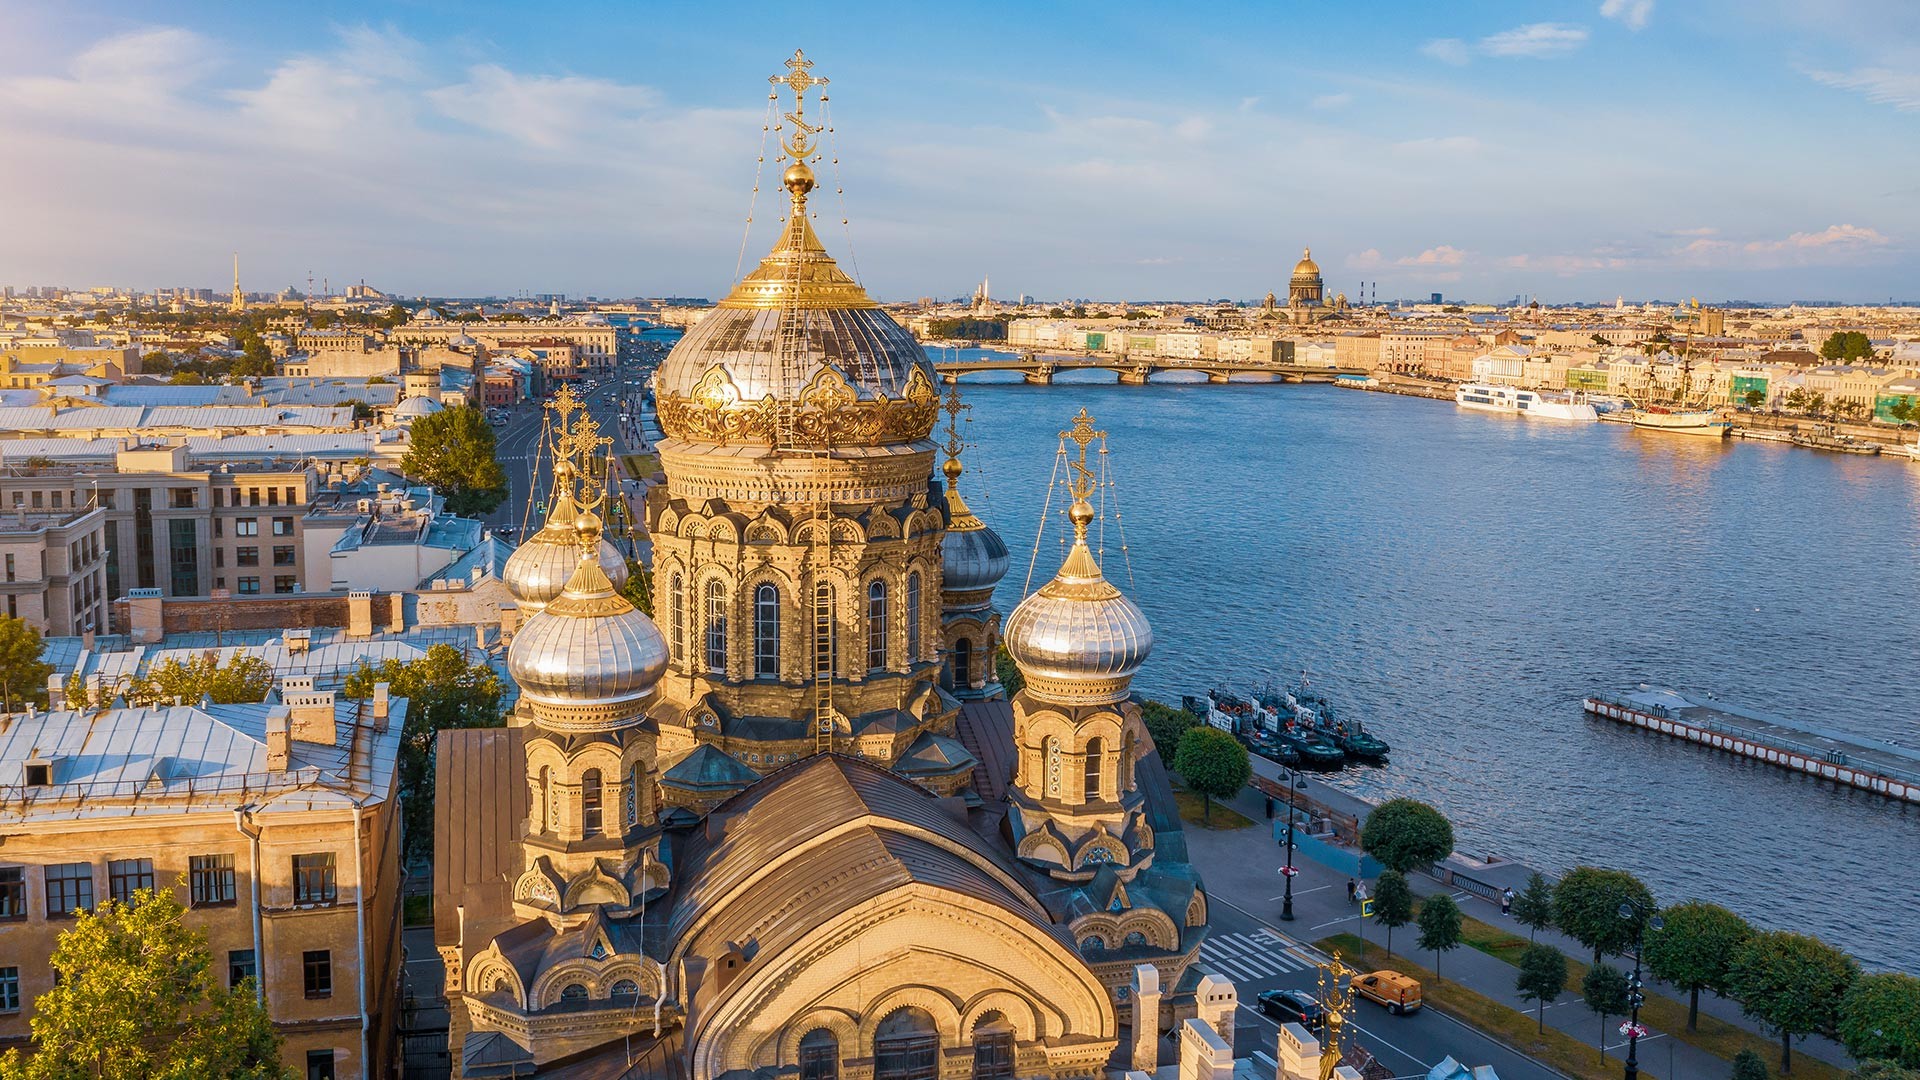 The Assumption Church on the embankment of the Neva River